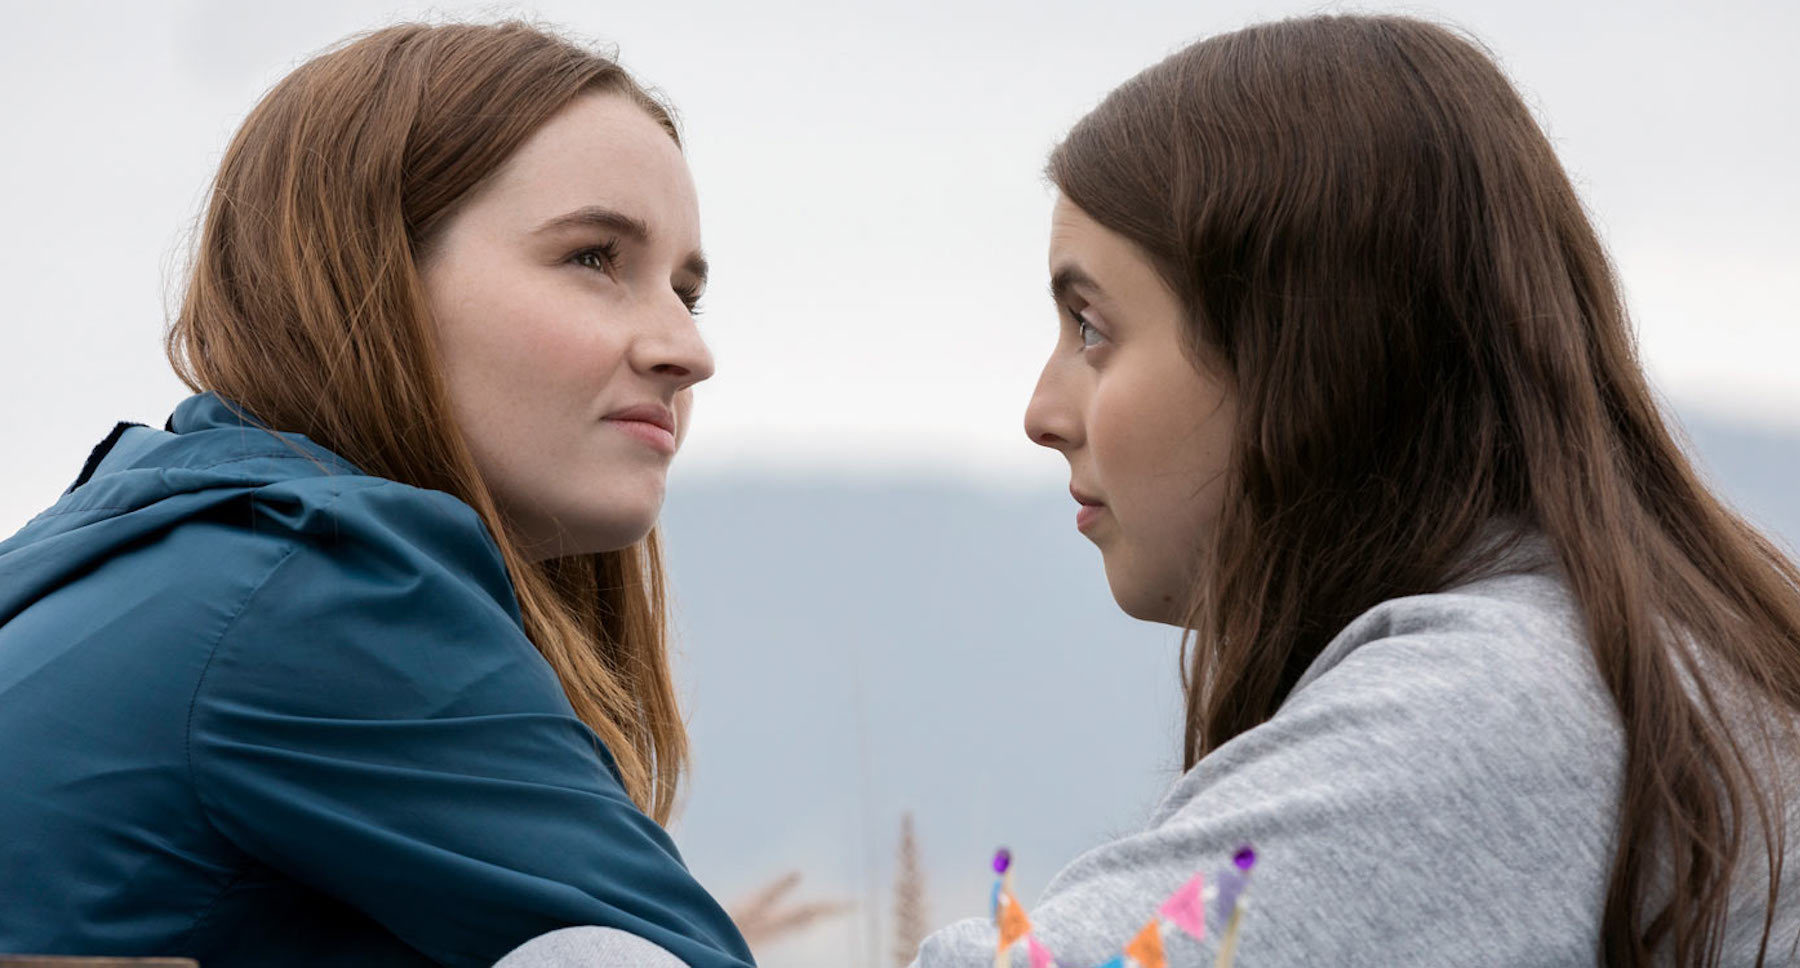 Actors Kaitlyn Dever (as Amy) and Beanie Feldstein	(as Molly) in the movie "Booksmart"